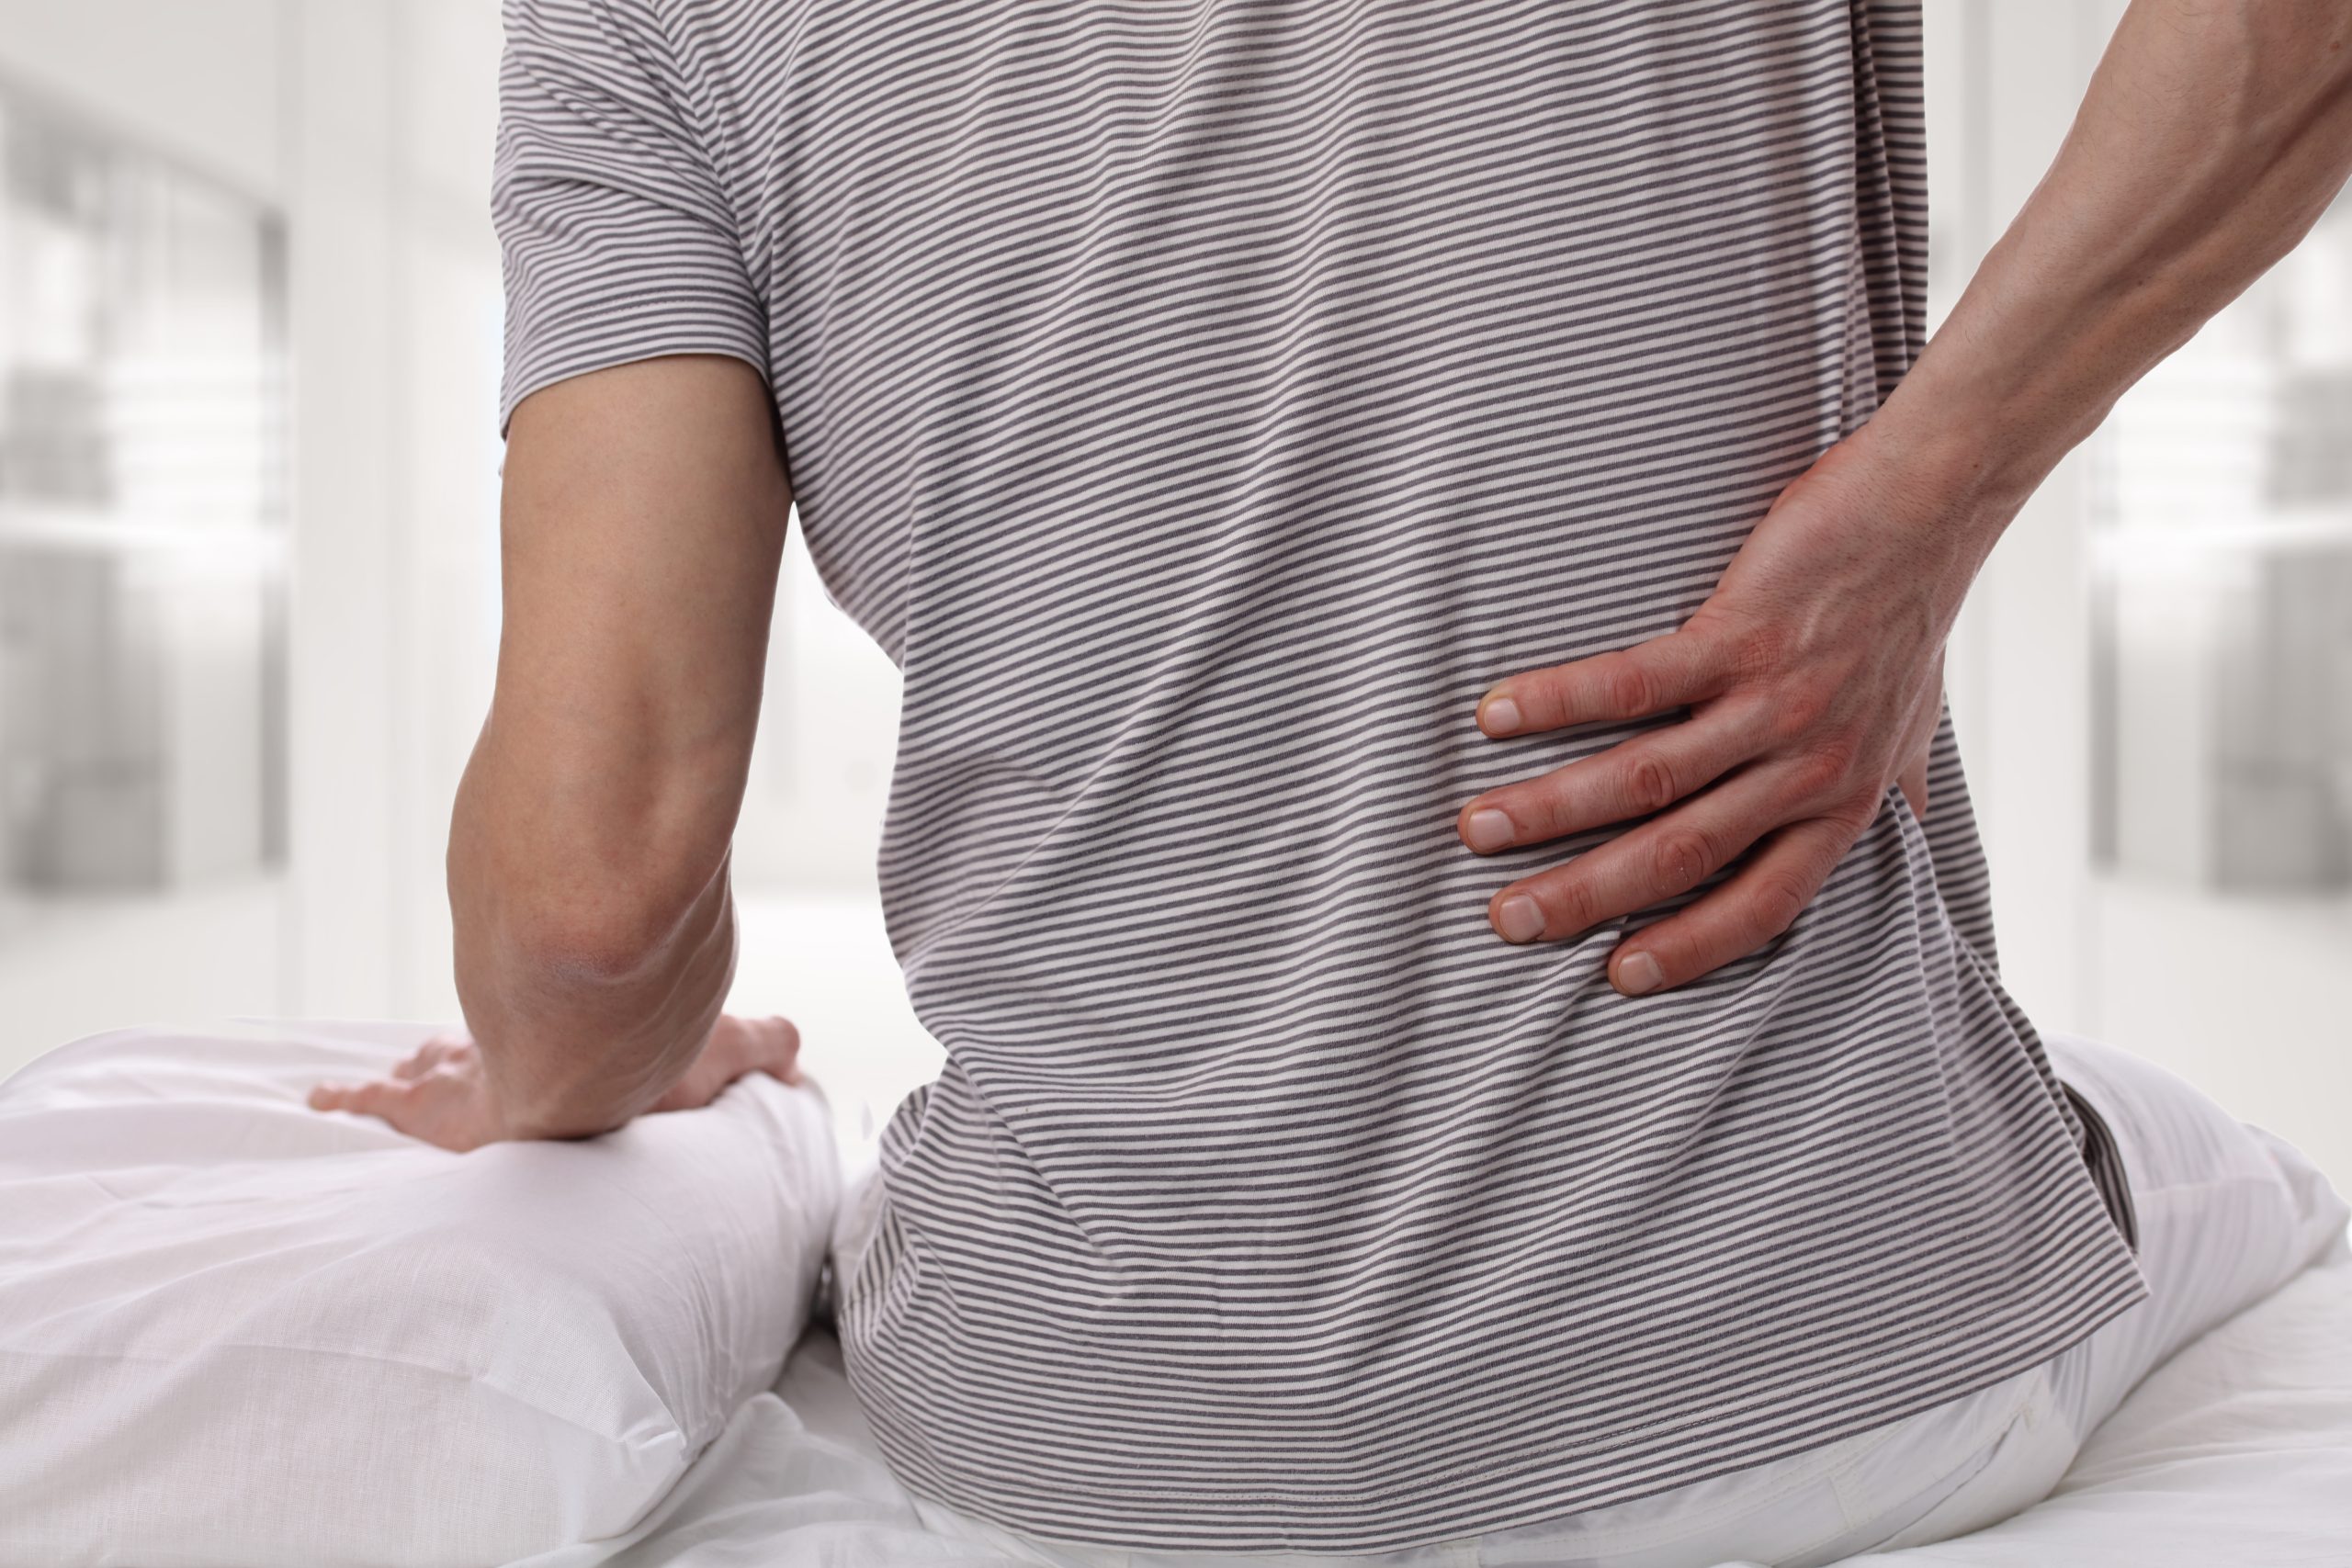 Physiotherapists can help treat spinal issues like scoliosis